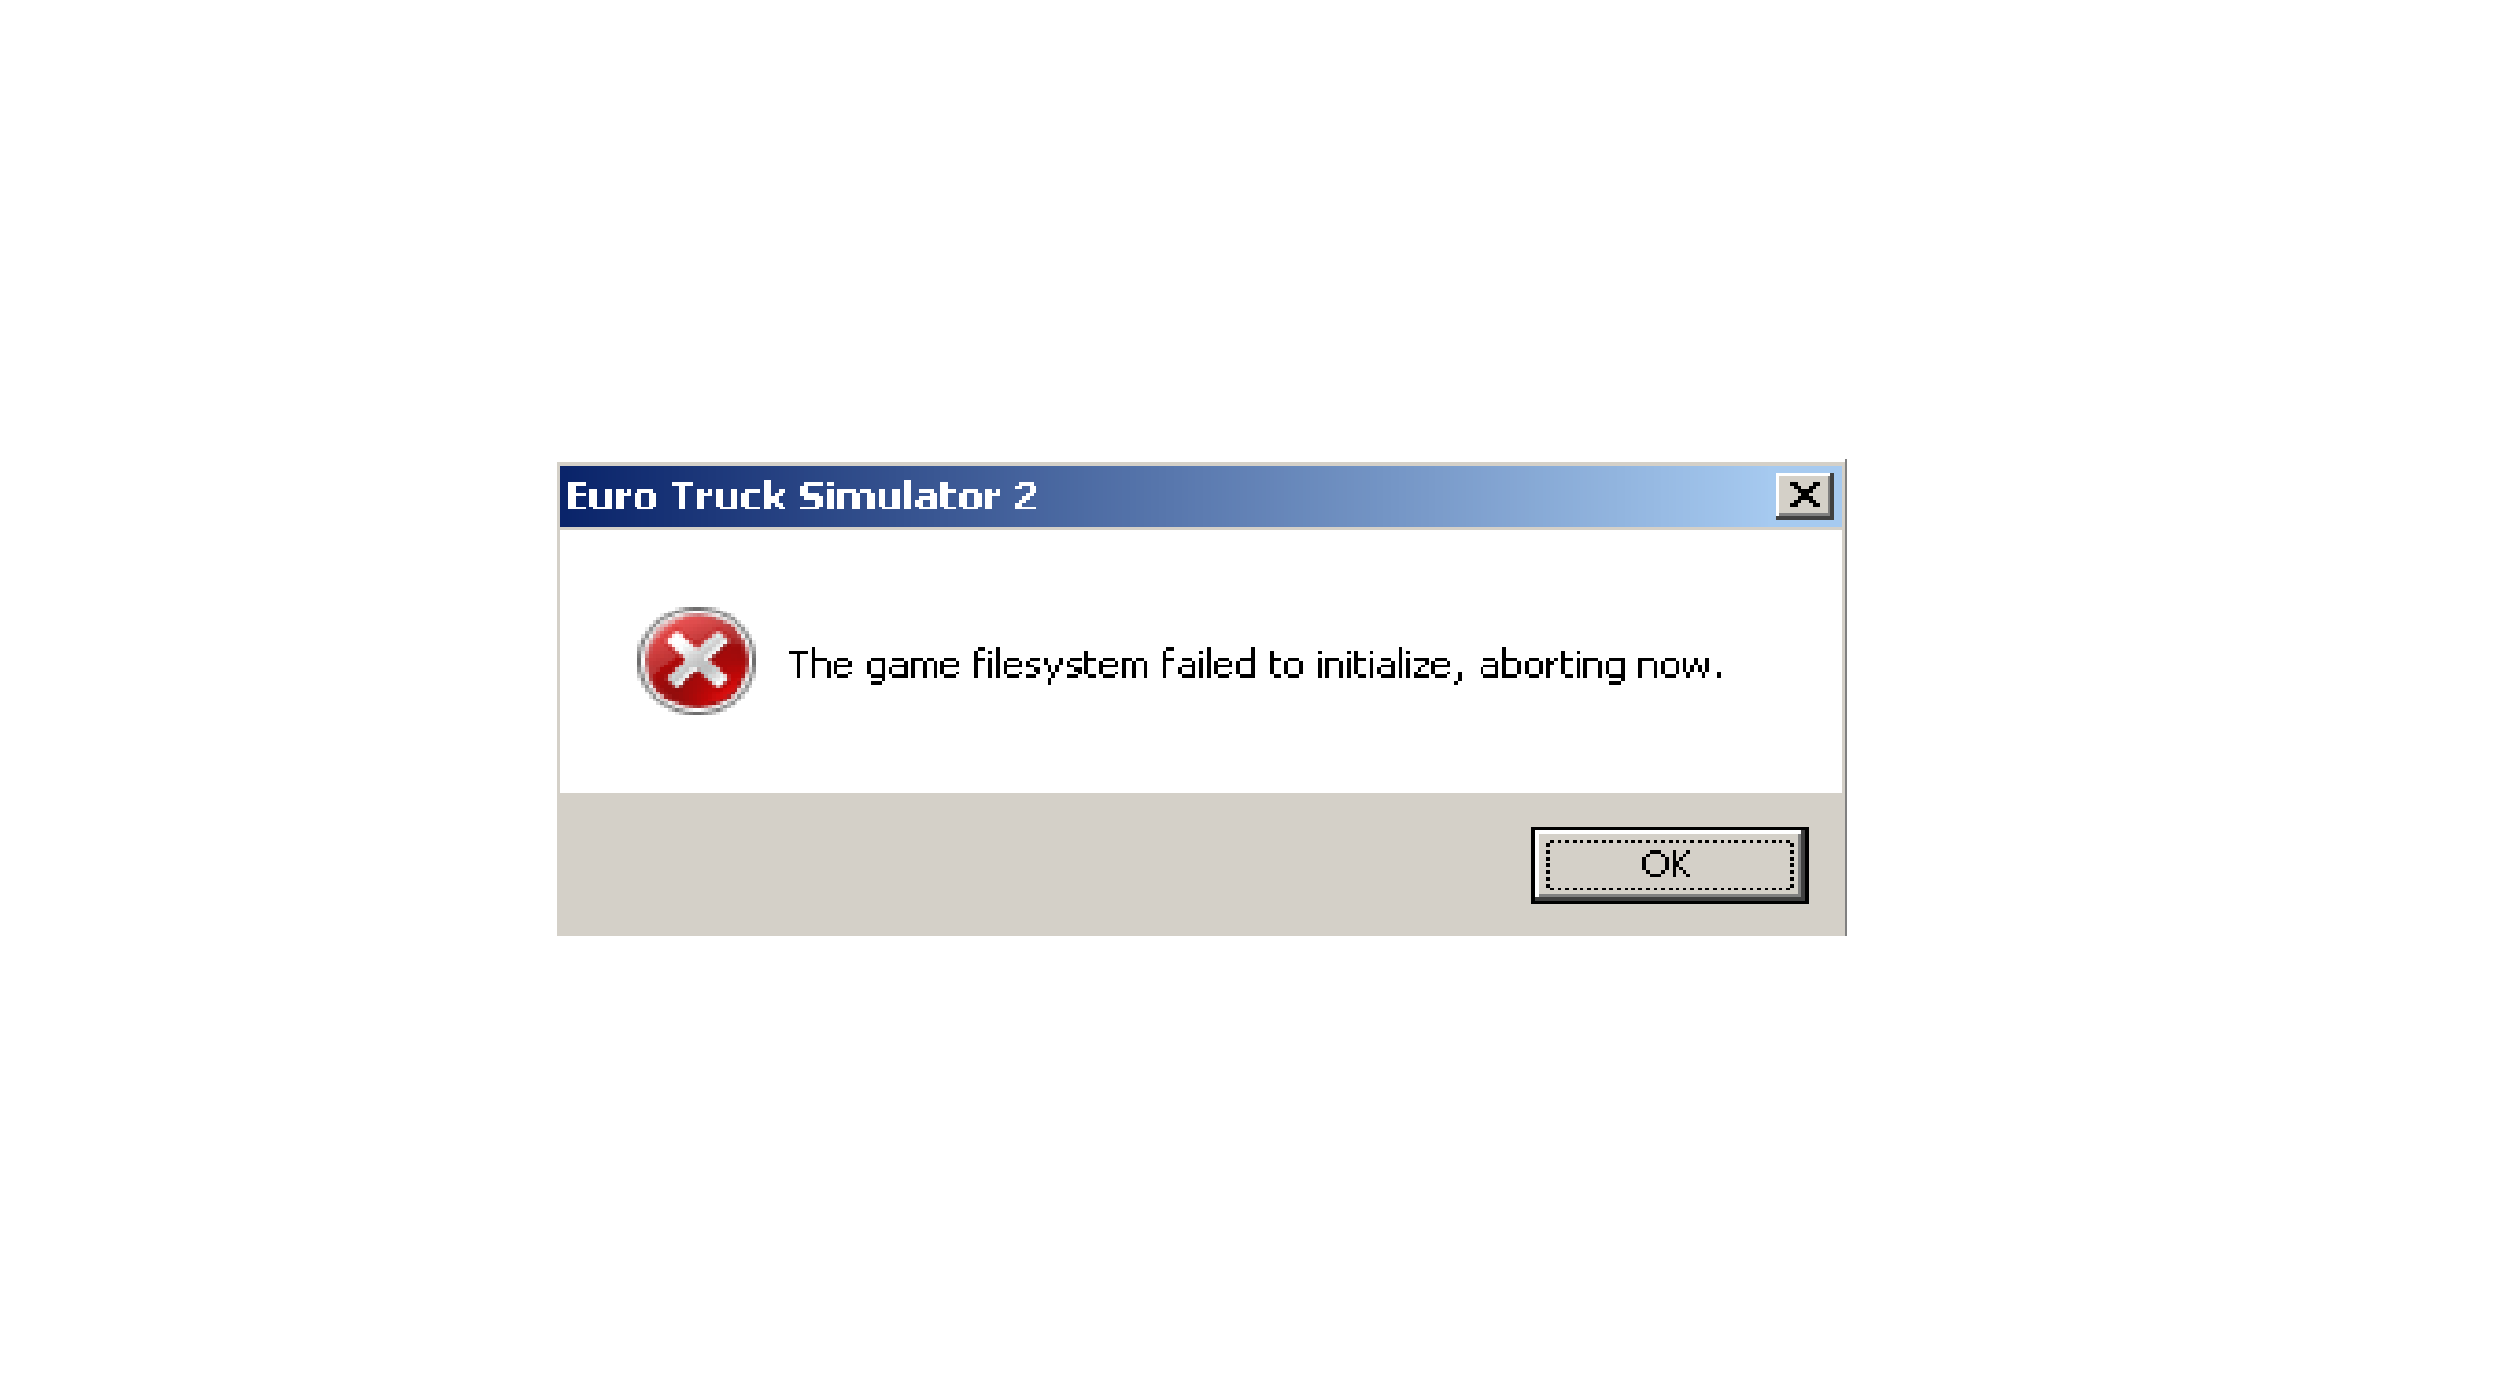 Failed to authorize. The game filesystem failed to initialize aborting Now Euro Truck Simulator 2. The game filesystem failed to initialize aborting Now. The game filesystem failed to initialize aborting Now American Truck Simulator. Failure to initialize.